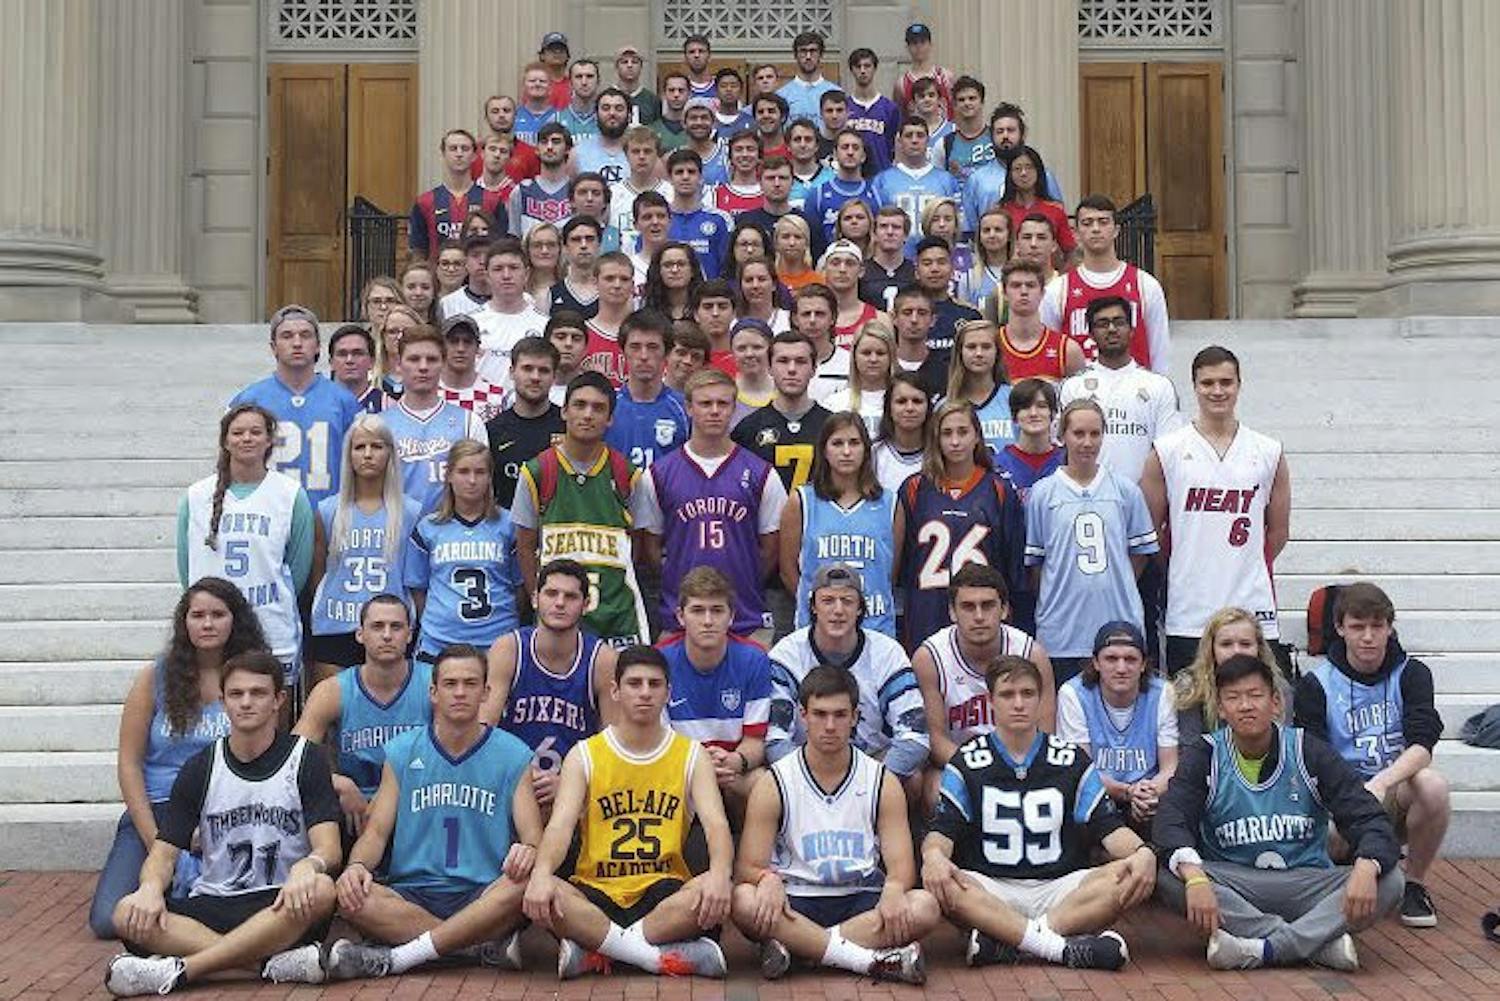 Students meet on Thursdays outside Wilson Library to celebrate Jersday by wearing sports jerseys.